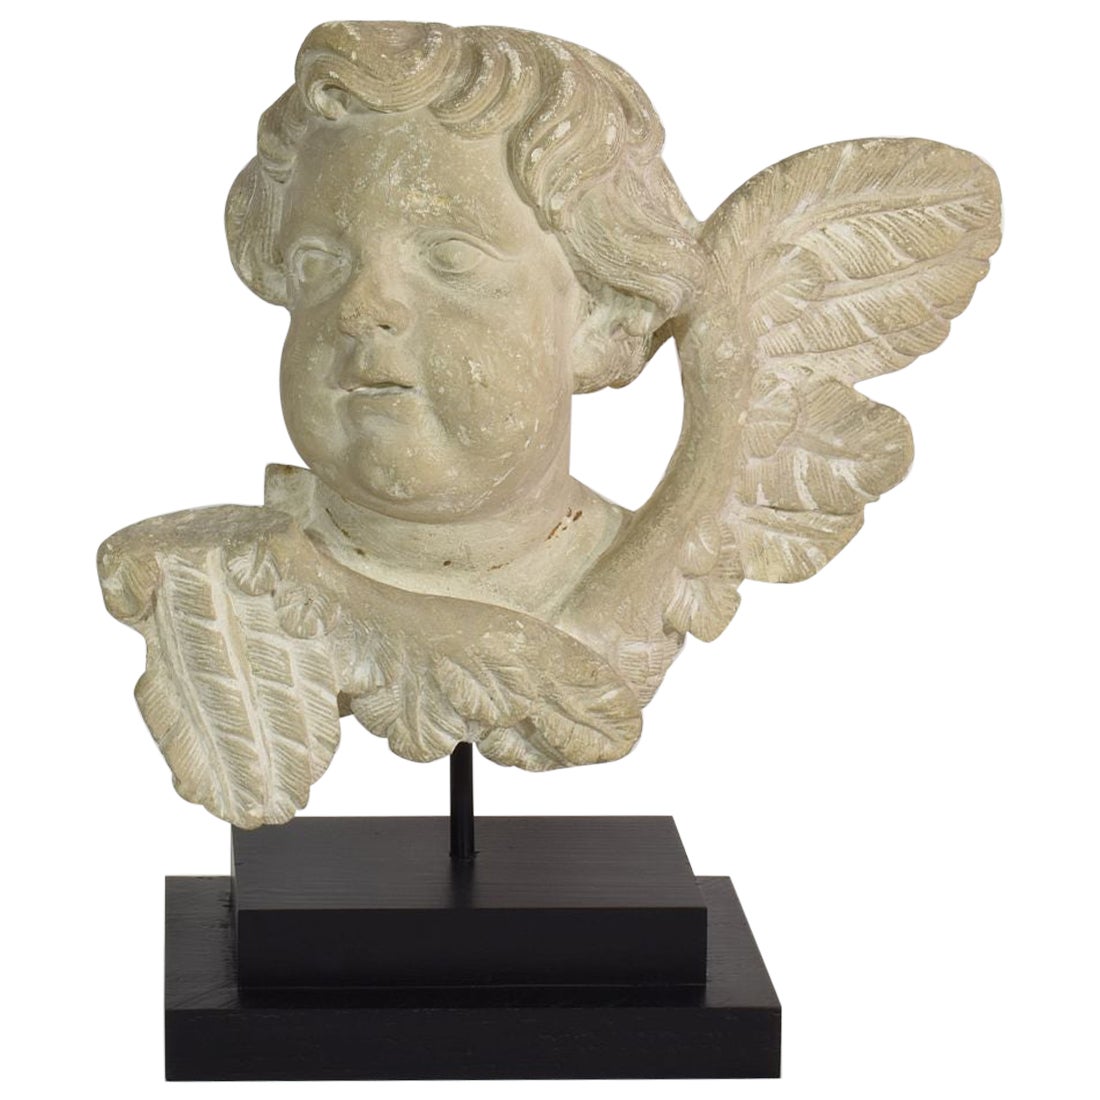 Collectable Angel - 35 For Sale on 1stDibs